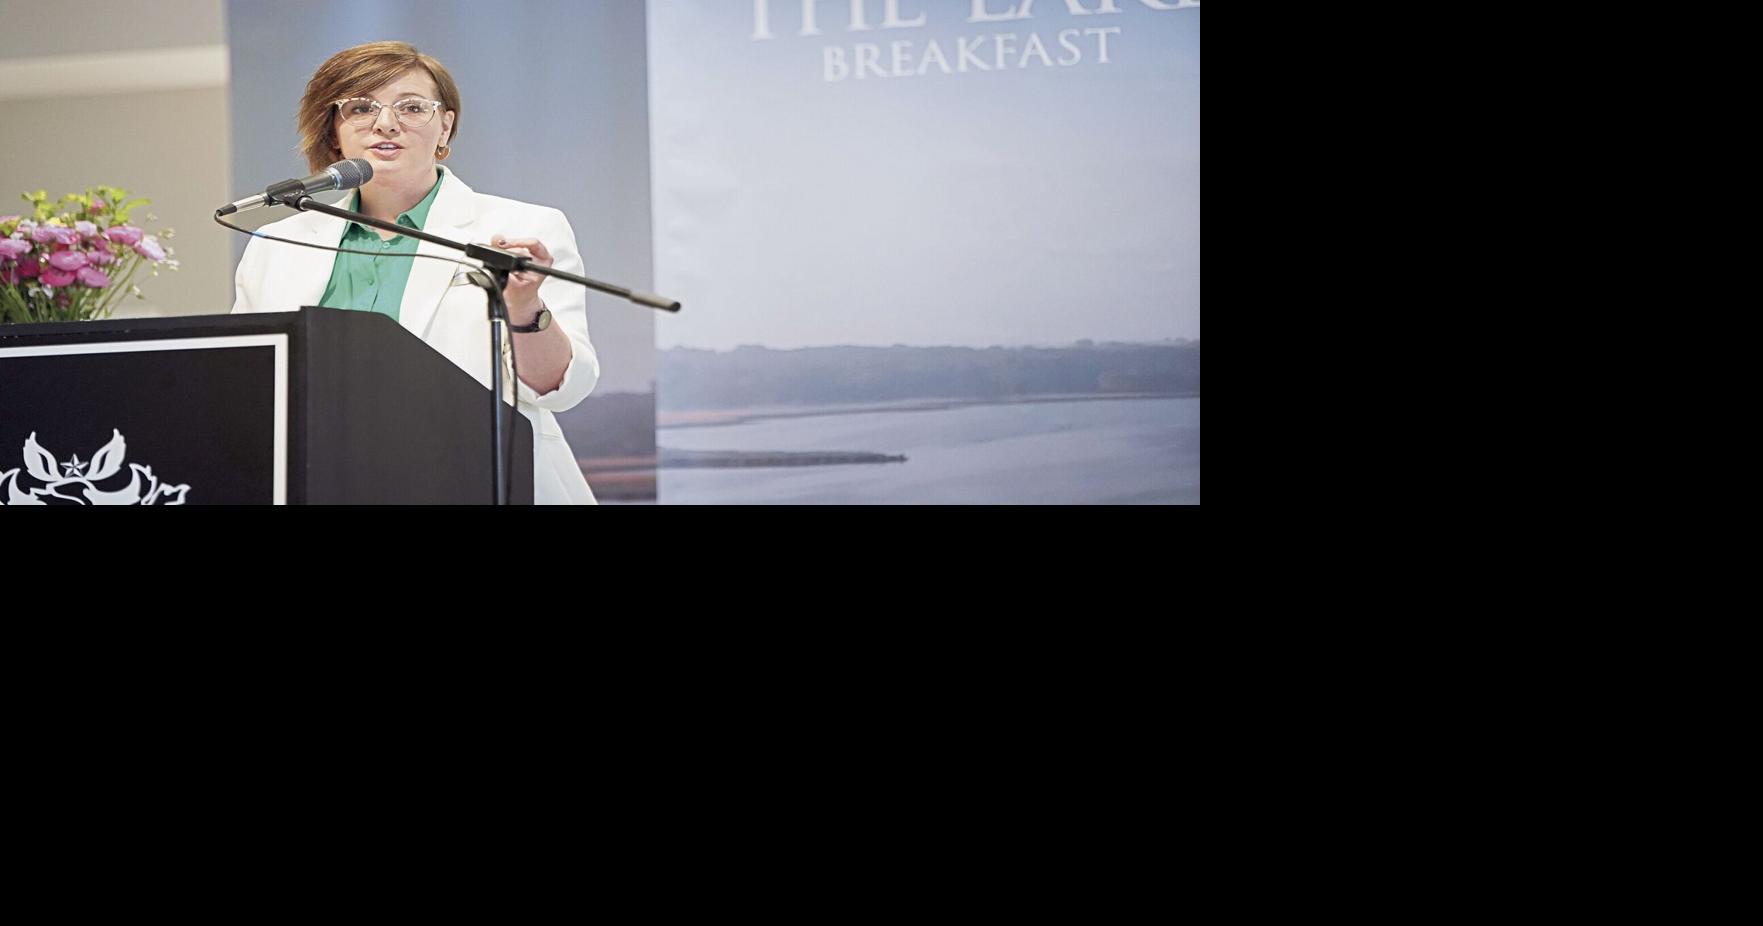 ‘We need to broaden our approach’: Prellwitz announces GLA’s new strategic plan during State of the Lake Breakfast and Annual Meeting | News